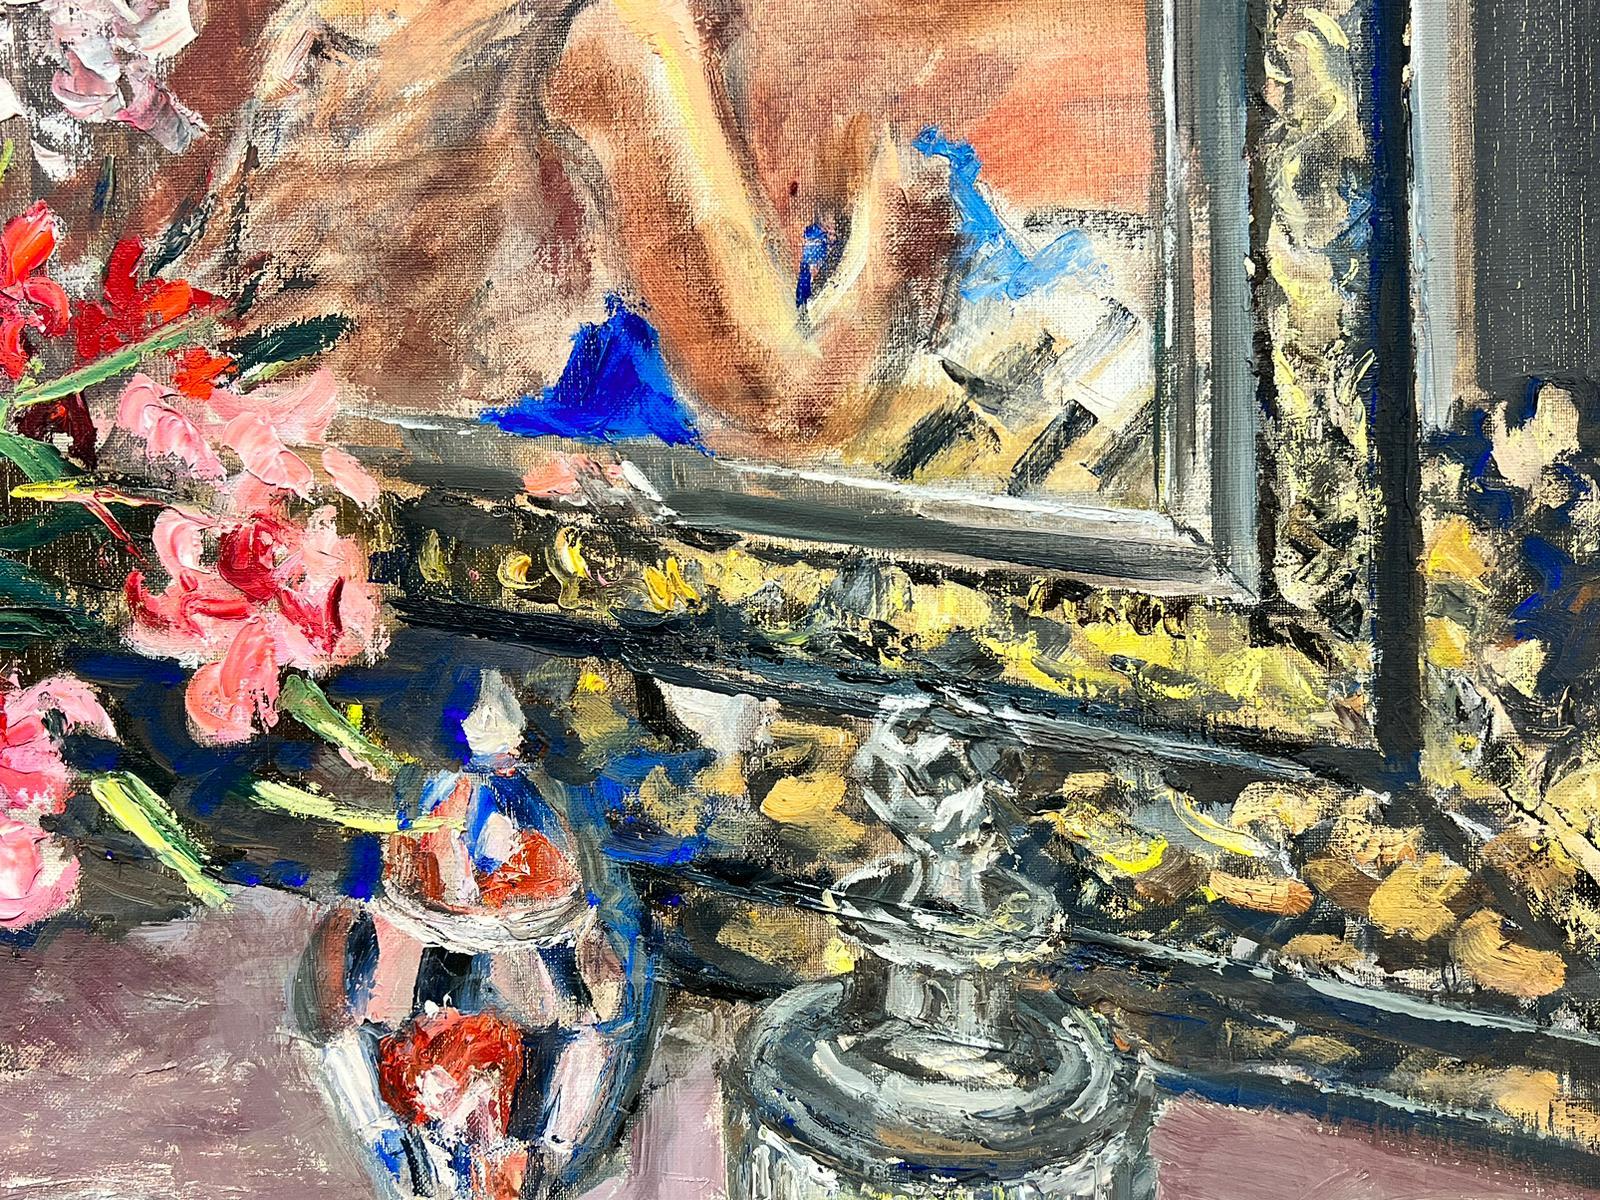 1960's French Interior Scene Lady Reflection in Window Sewing Still Life Flowers - Post-Impressionist Painting by Josine Vignon